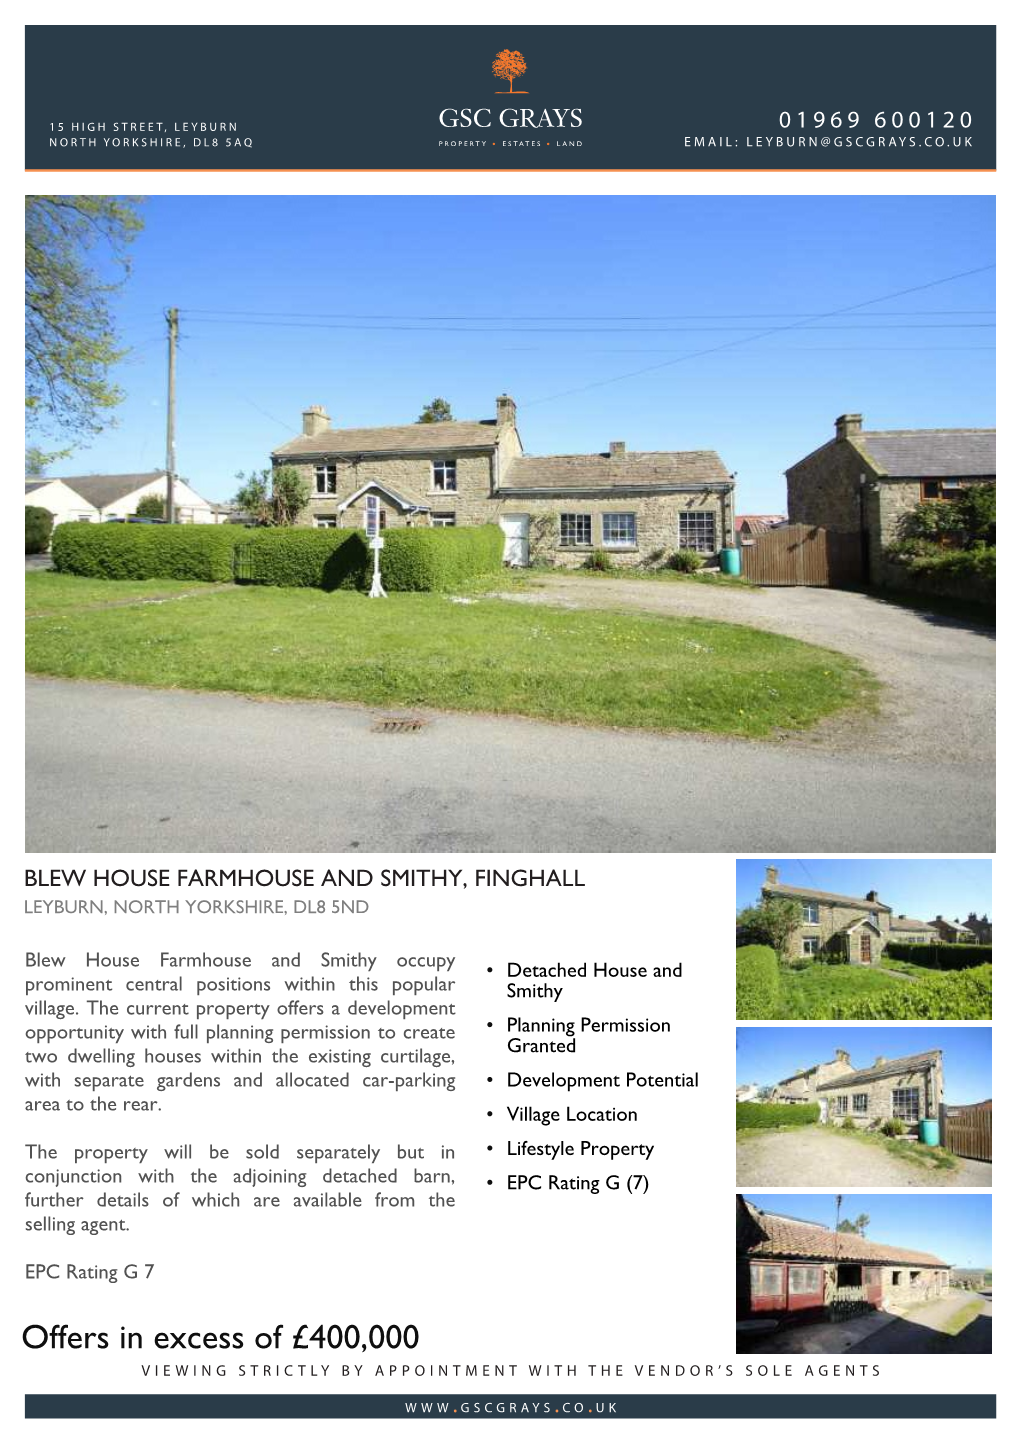 Offers in Excess of £400,000 Viewing Strictly by Appointment with the Vendor’S Sole Agents